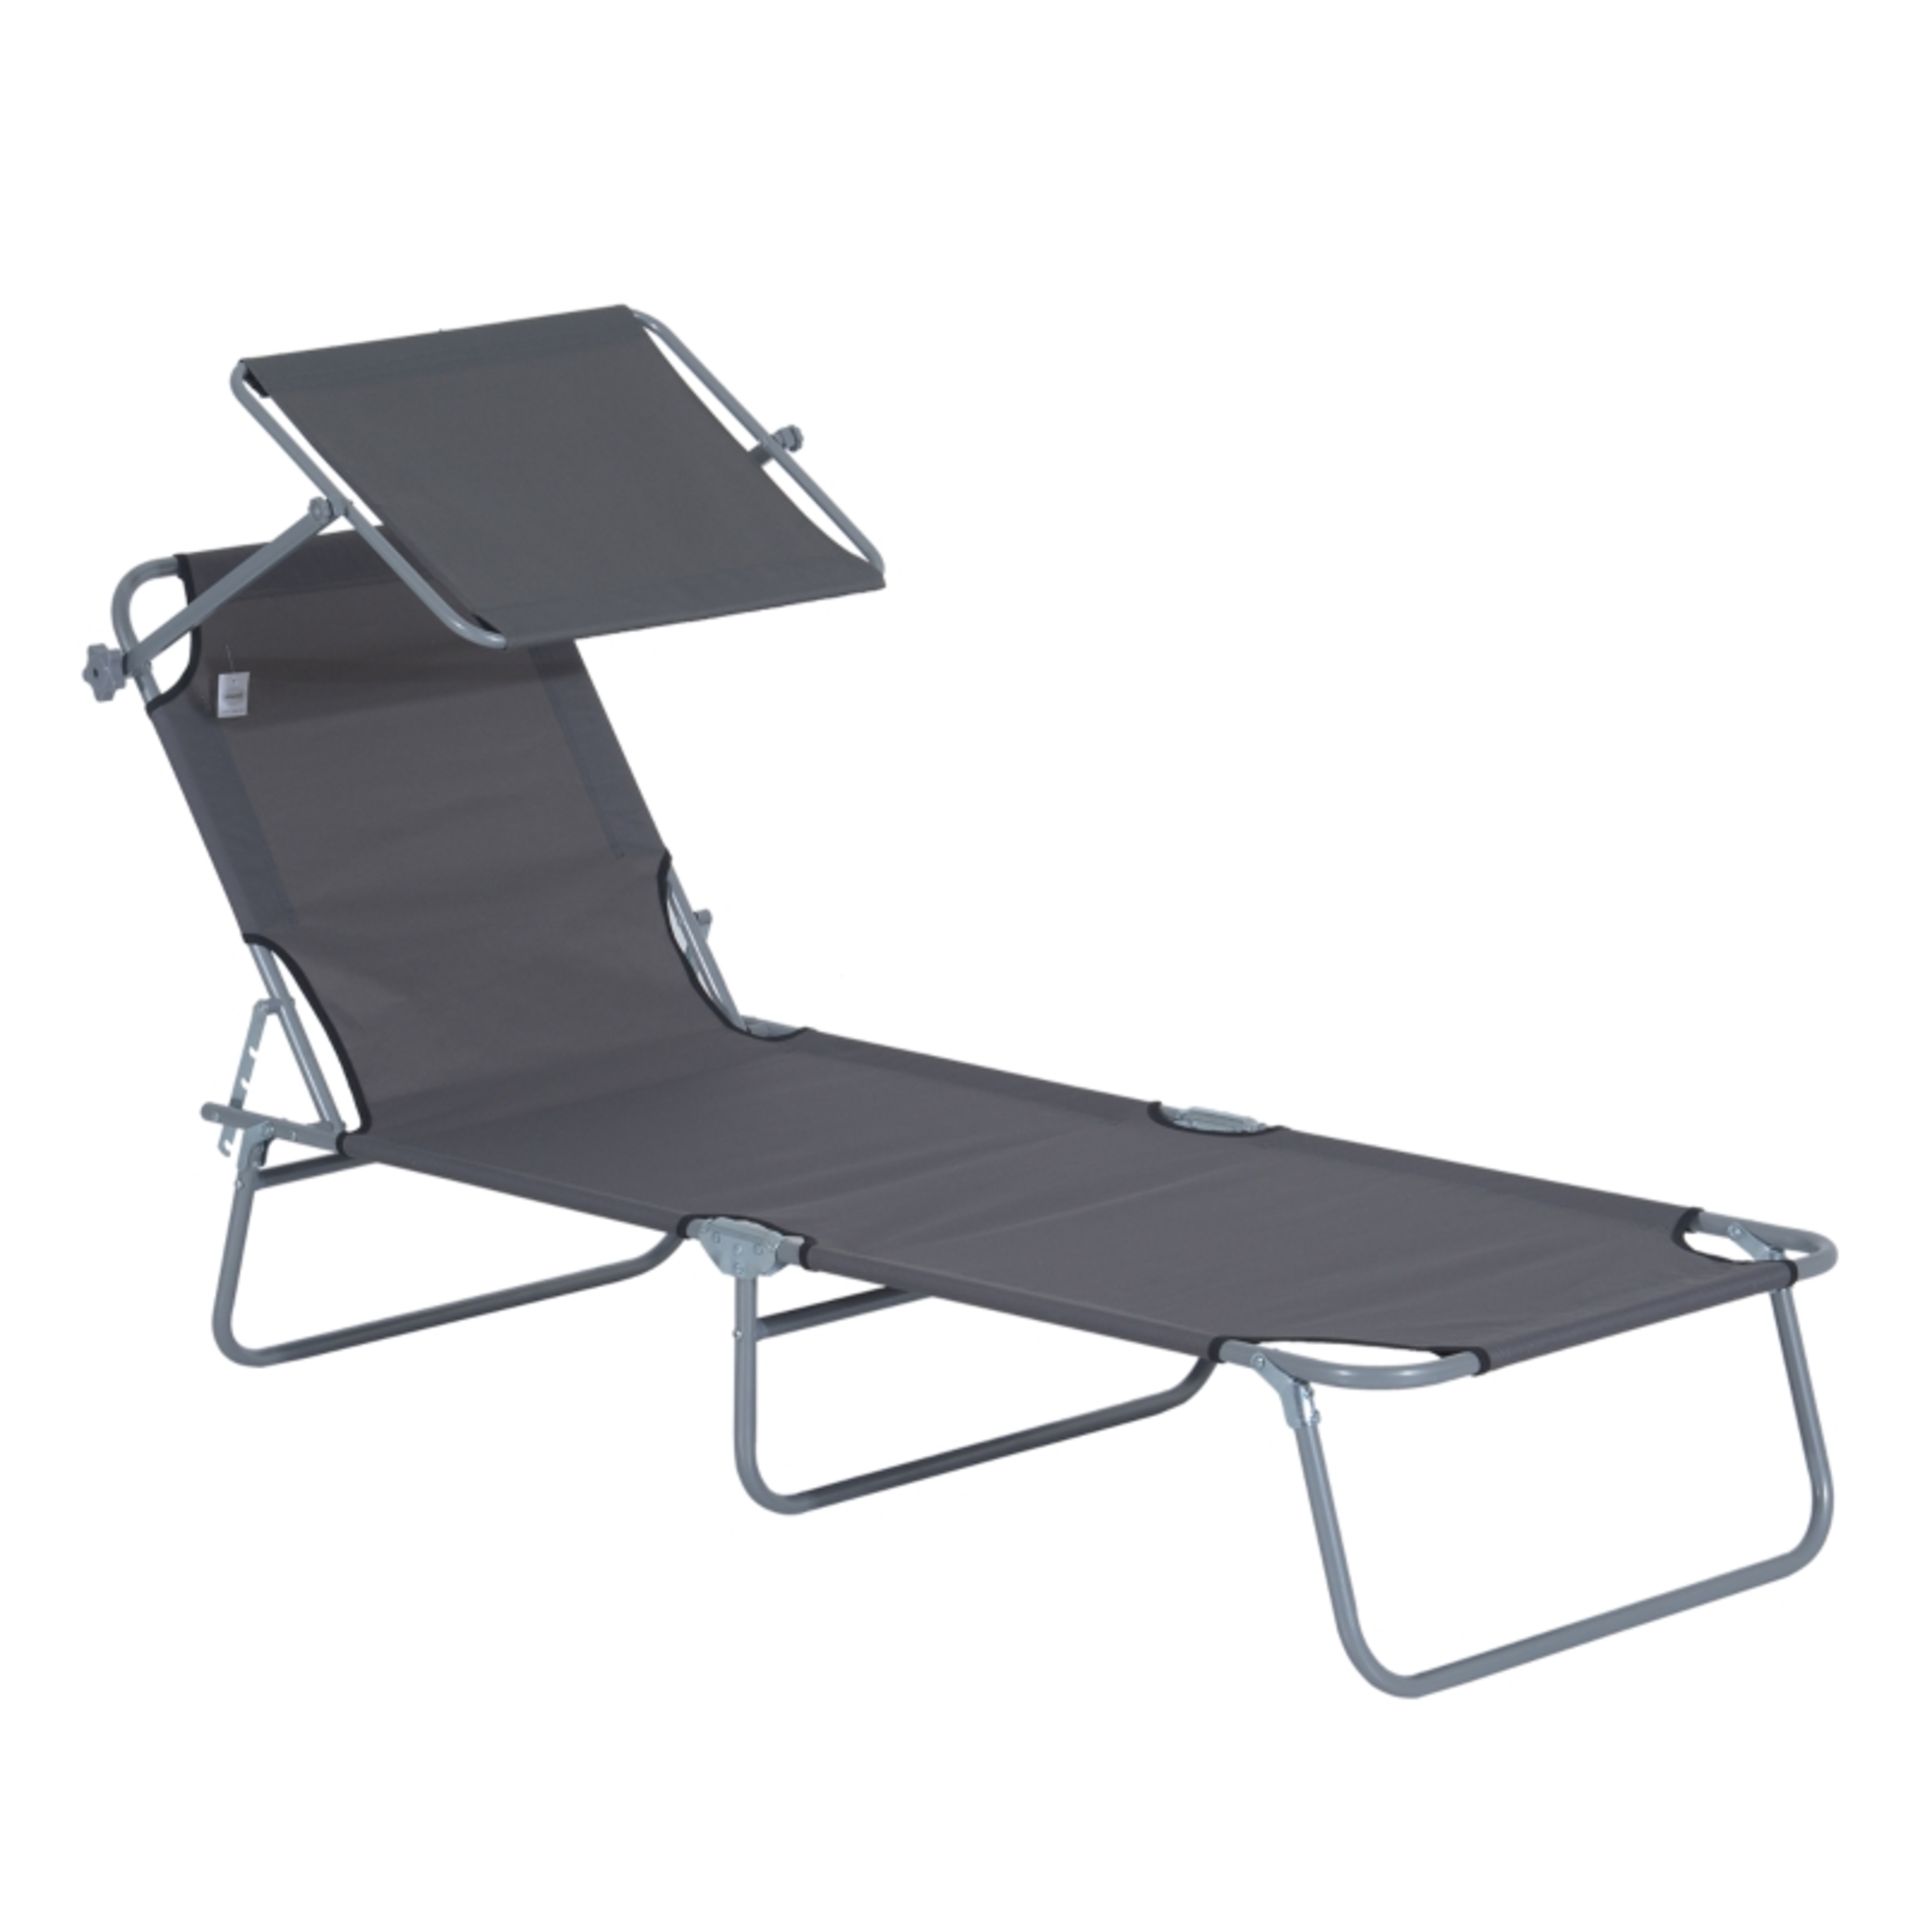 RPP £54.99 -Outsunny Reclining Chair Sun Lounger Folding Lounger Seat with Sun Shade Awning Beach - Image 2 of 4